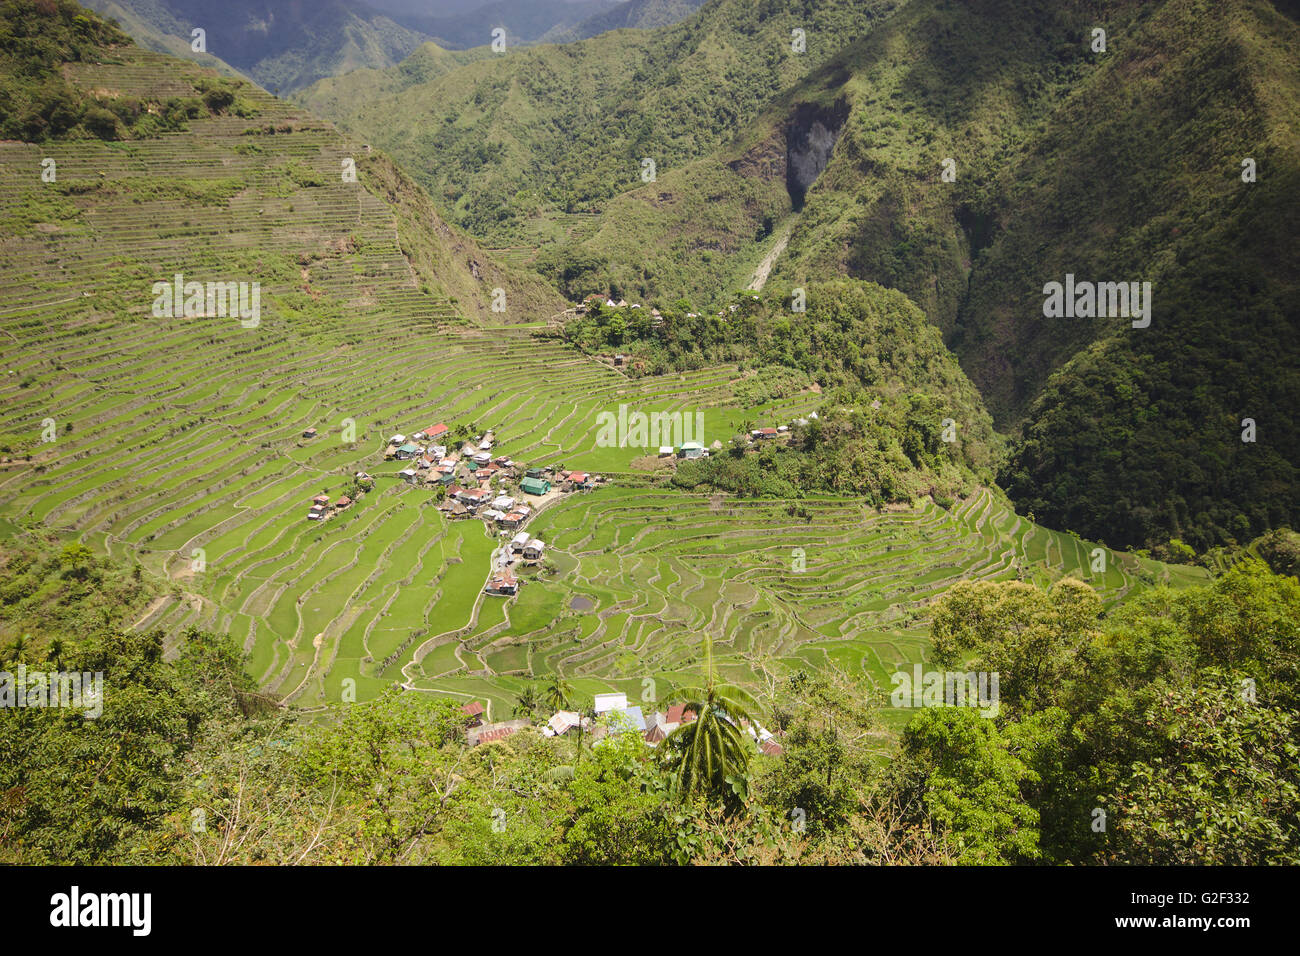 Ifugao rice terraces and the village Batad, northern Luzon, Philippines Stock Photo